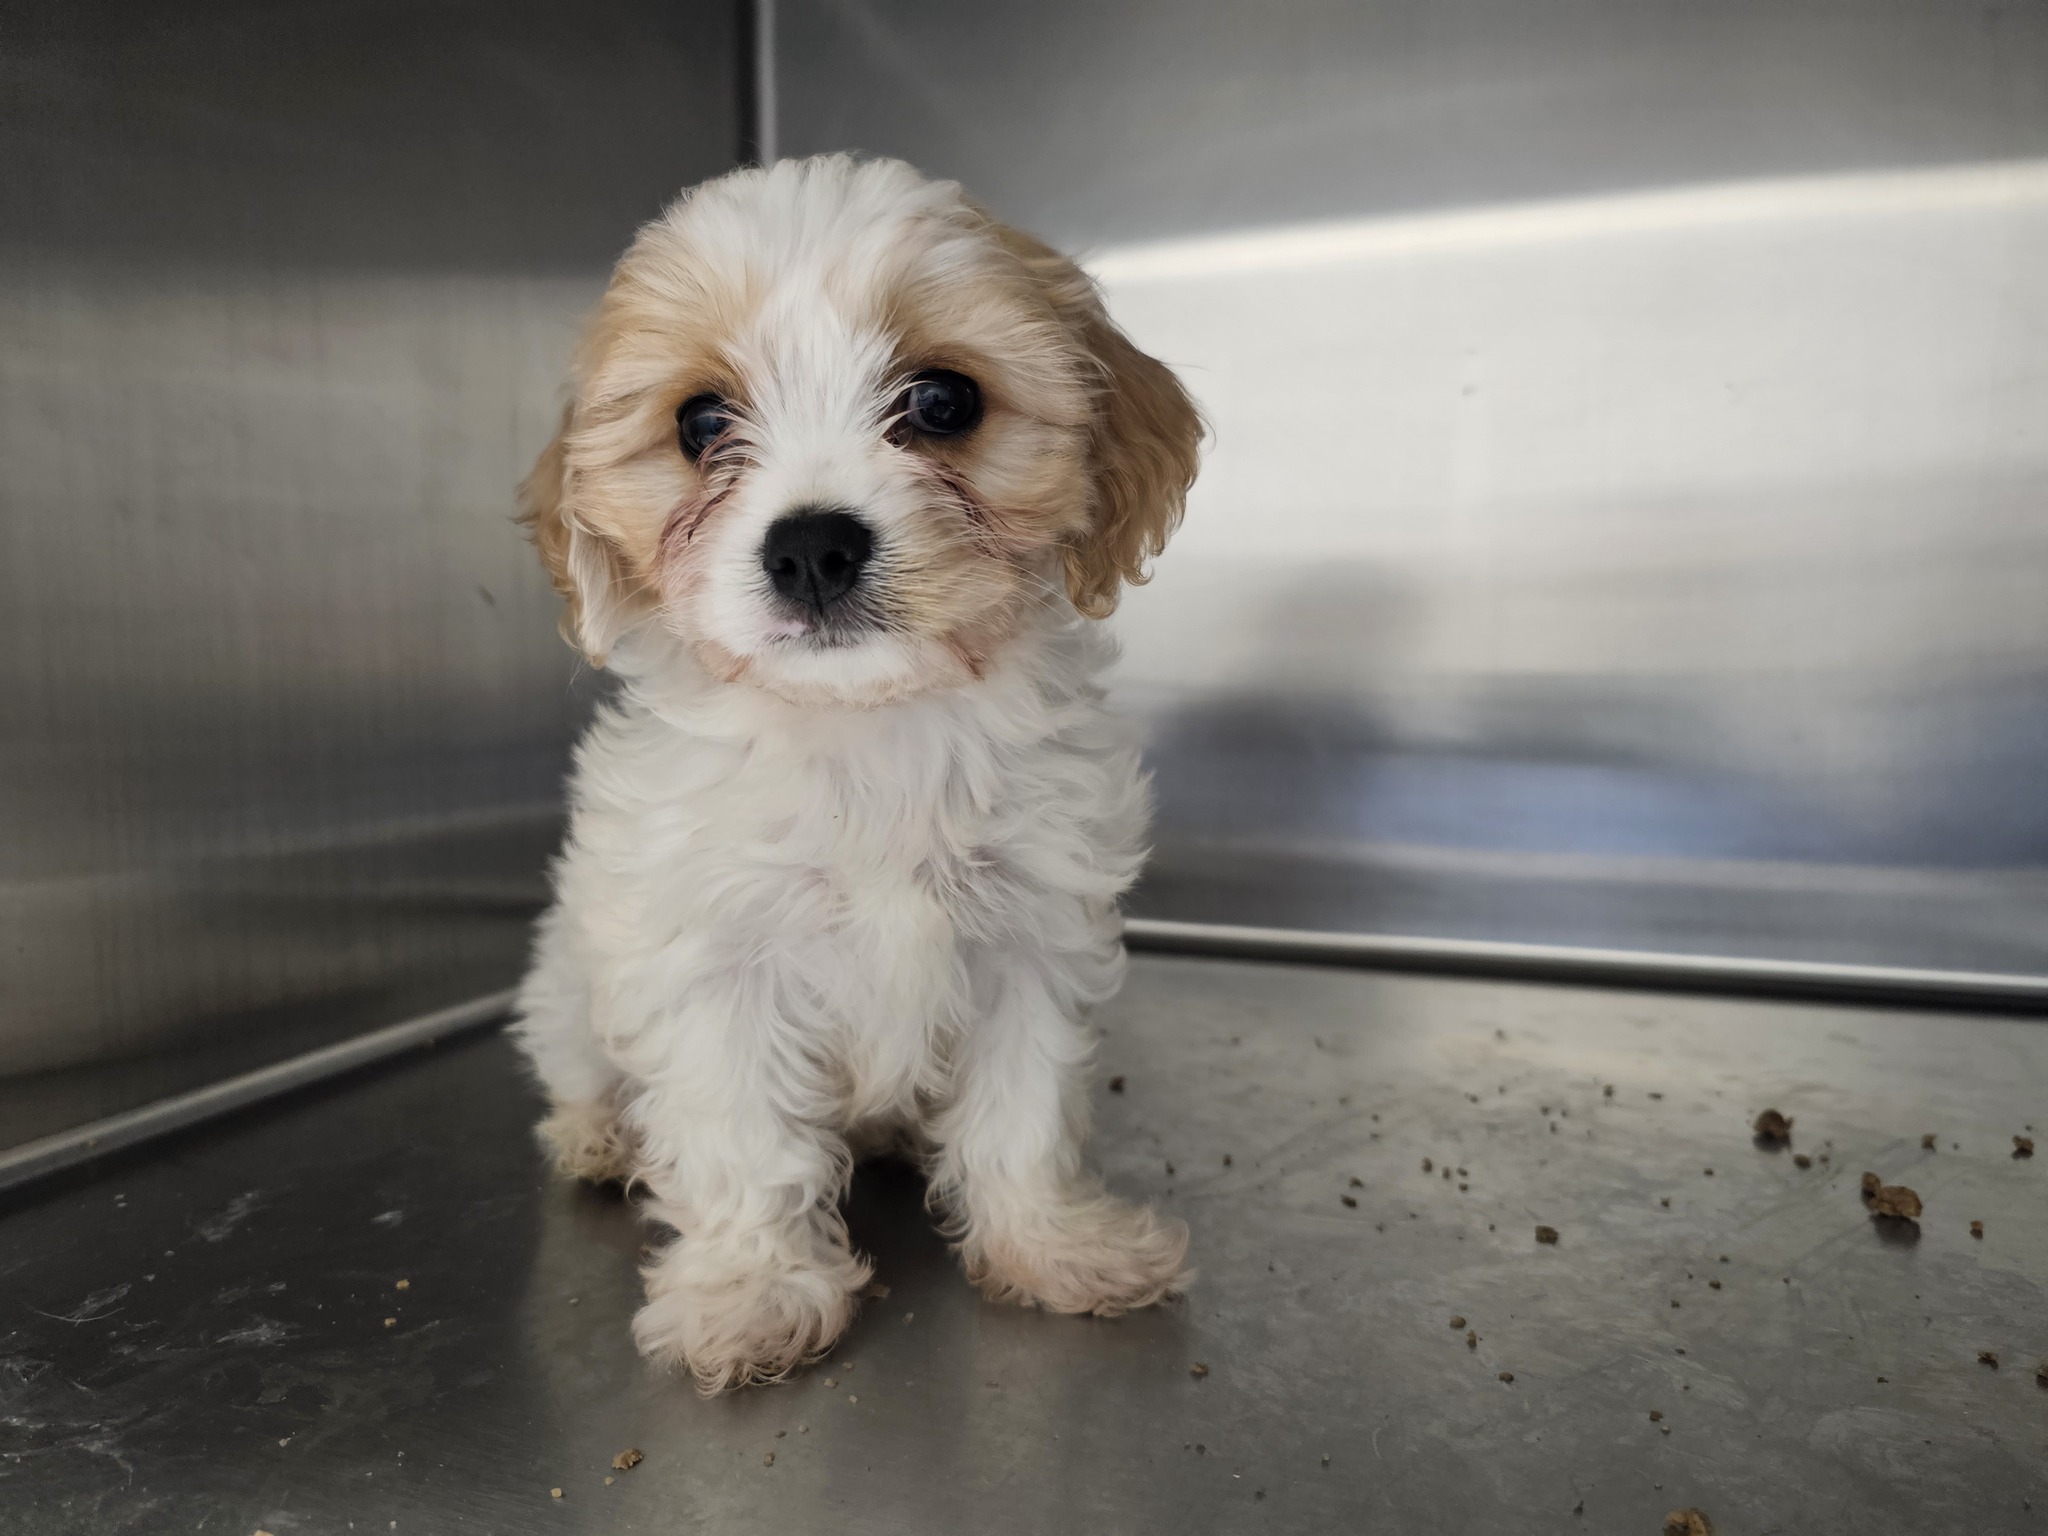 Puppies have been found at Cairnryan ferry port.